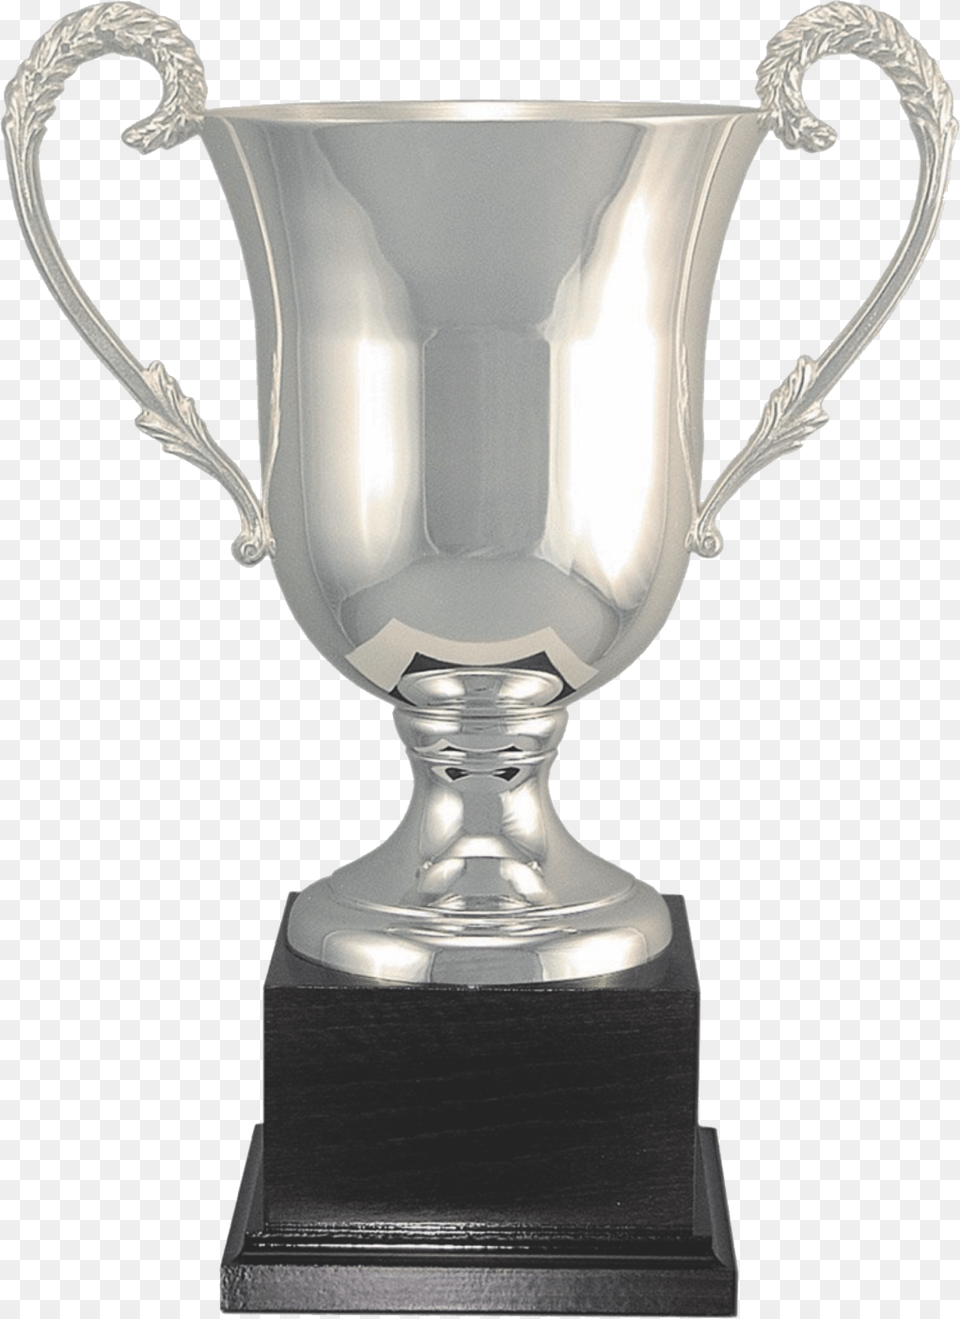 Kisspng Trophy Silver Award Cup Commemorative Plaque Silver Gold Plated Trophies Free Png